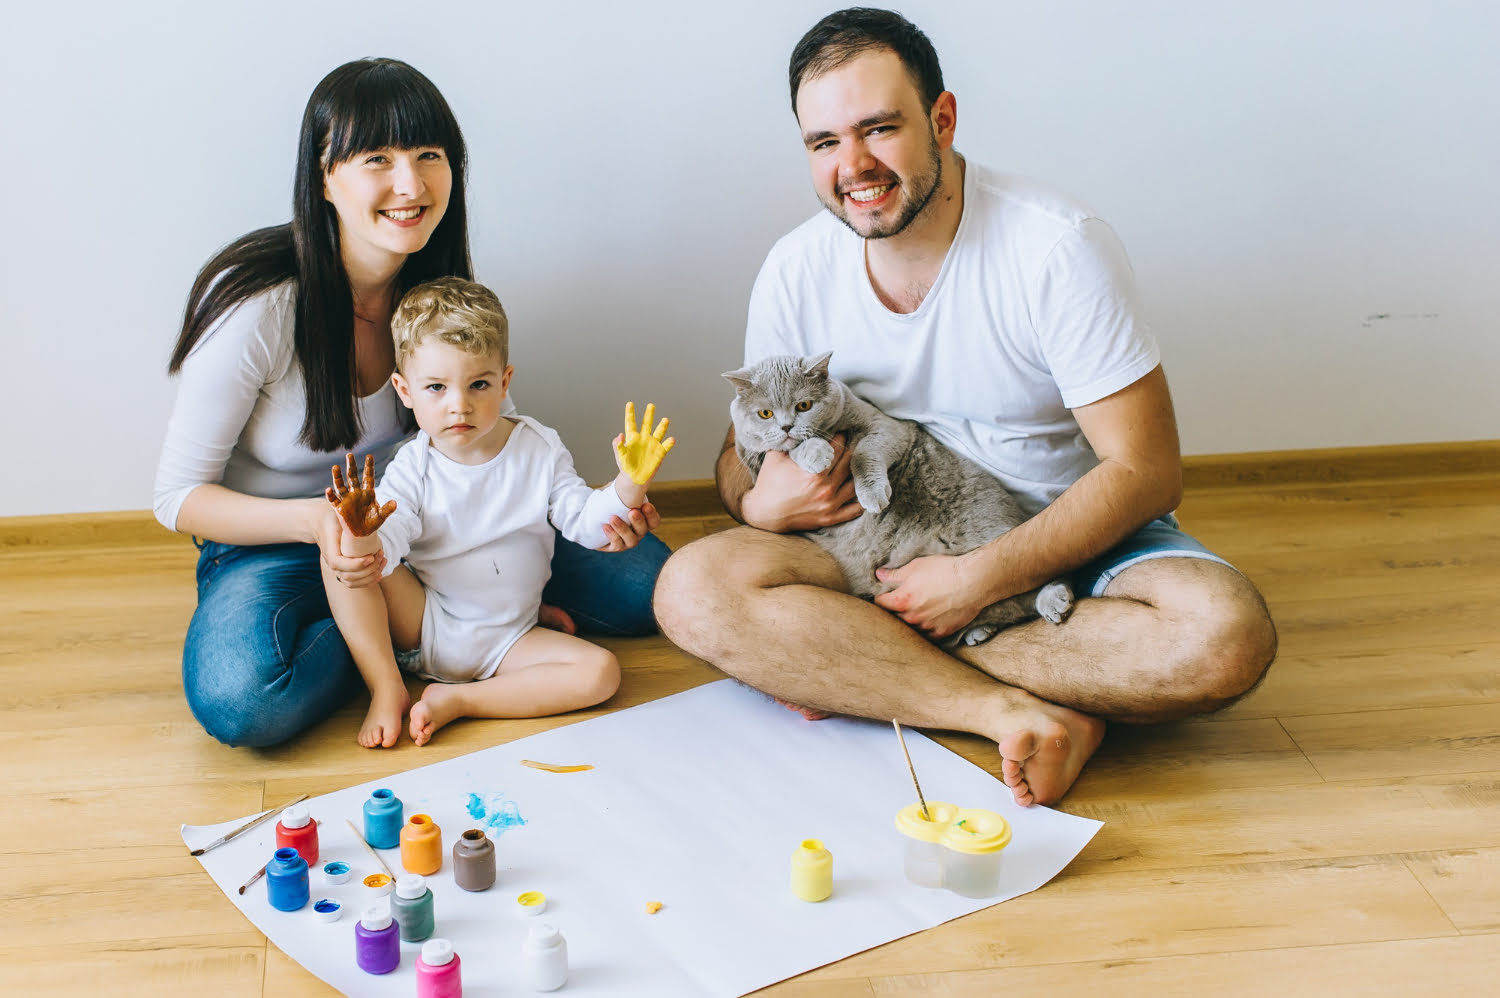 Creative Family Sketching Activities For Everyone